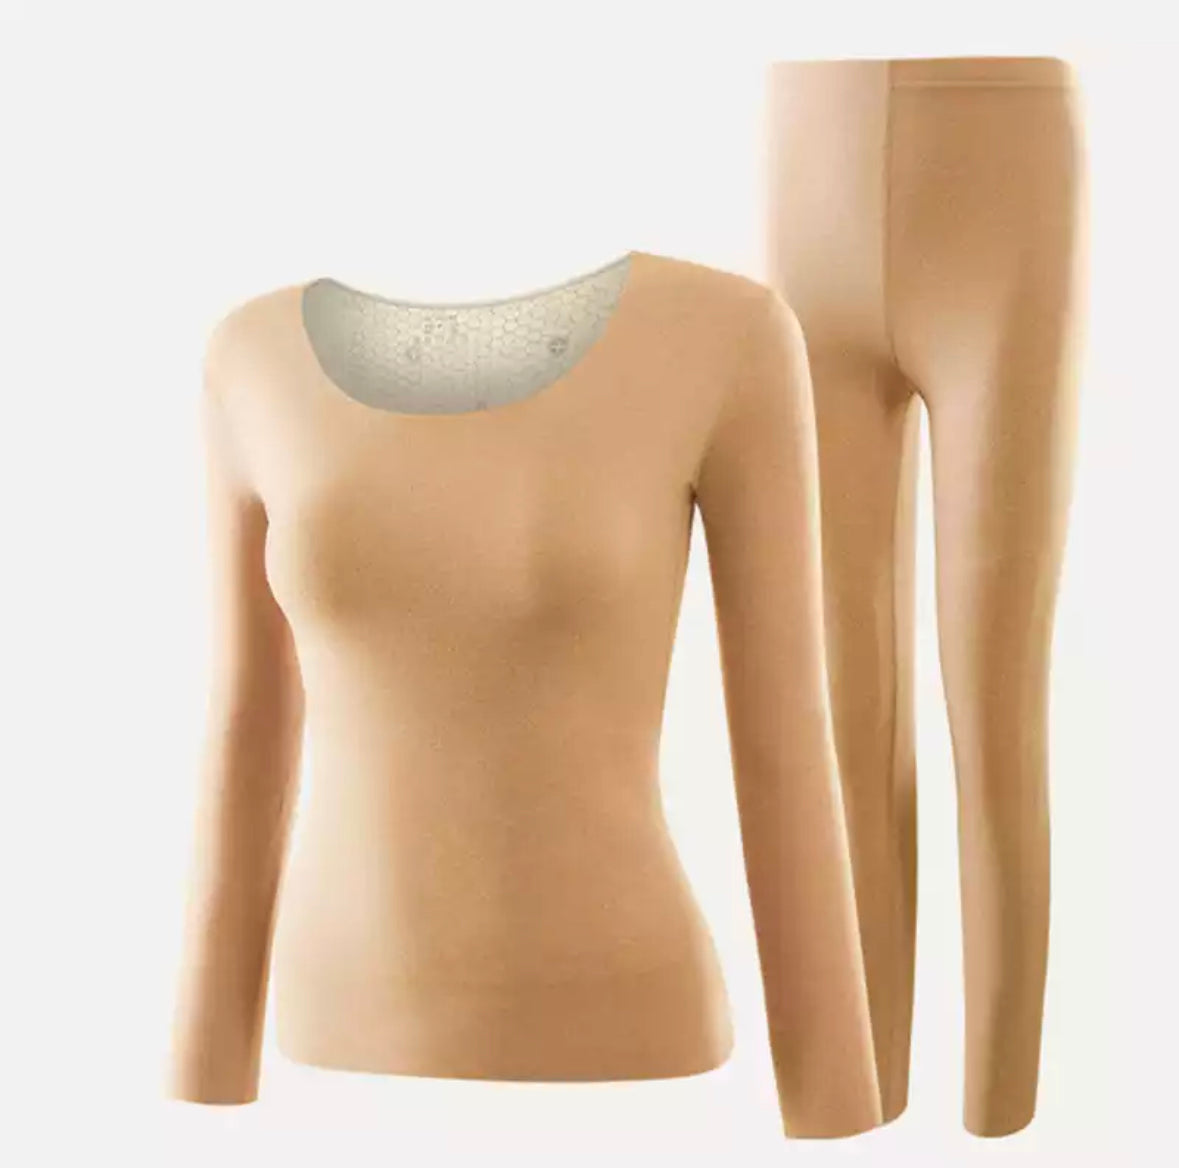 coloured thermal underwear - OFF-55% >Free Delivery